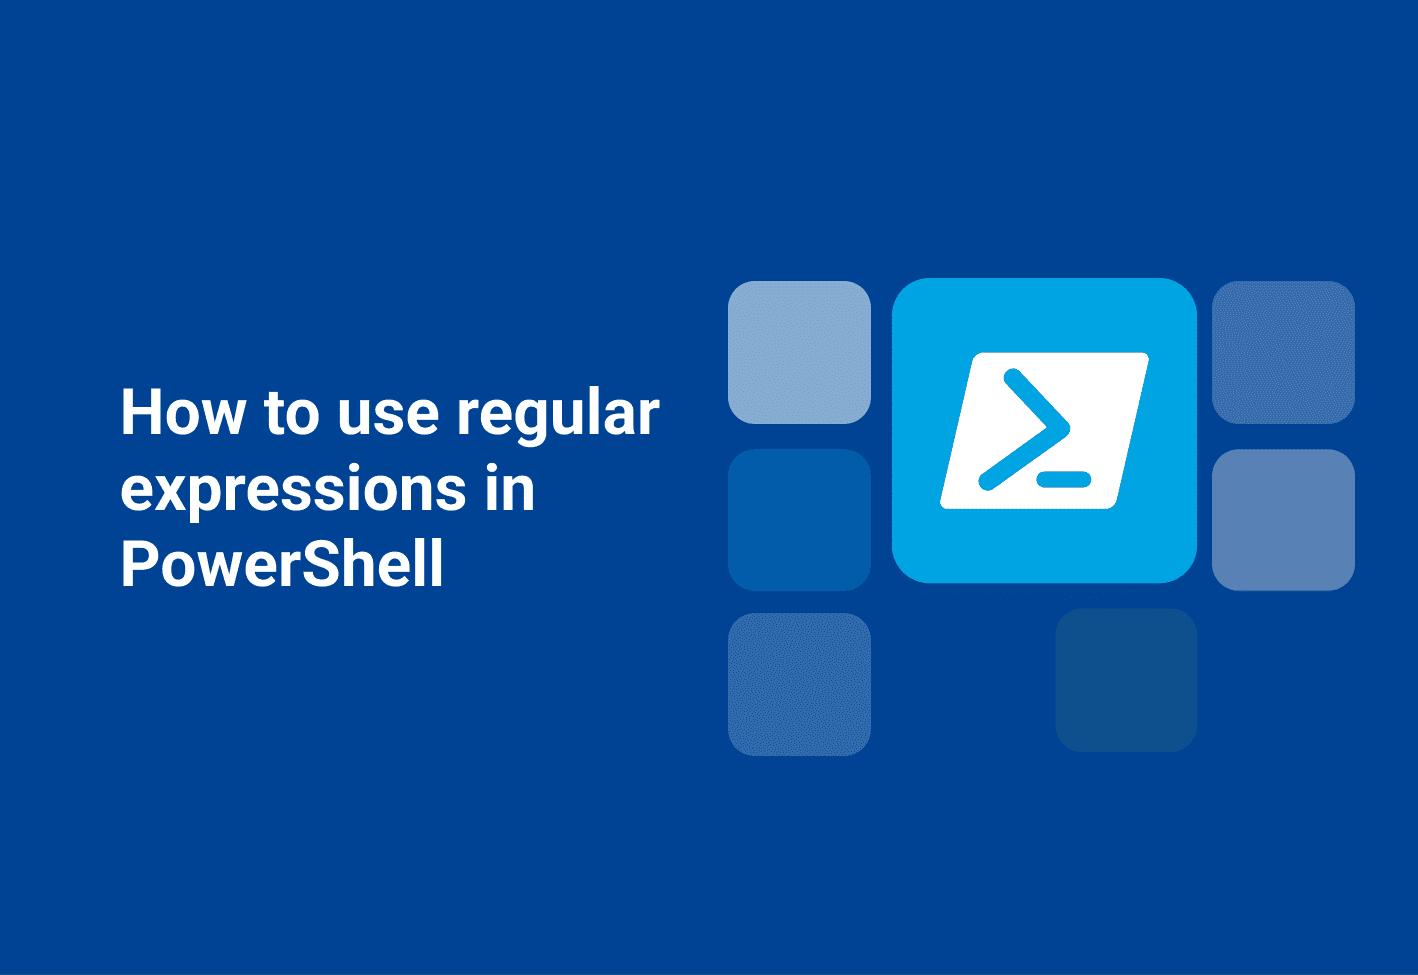 How to use regular expressions in PowerShell hero image.